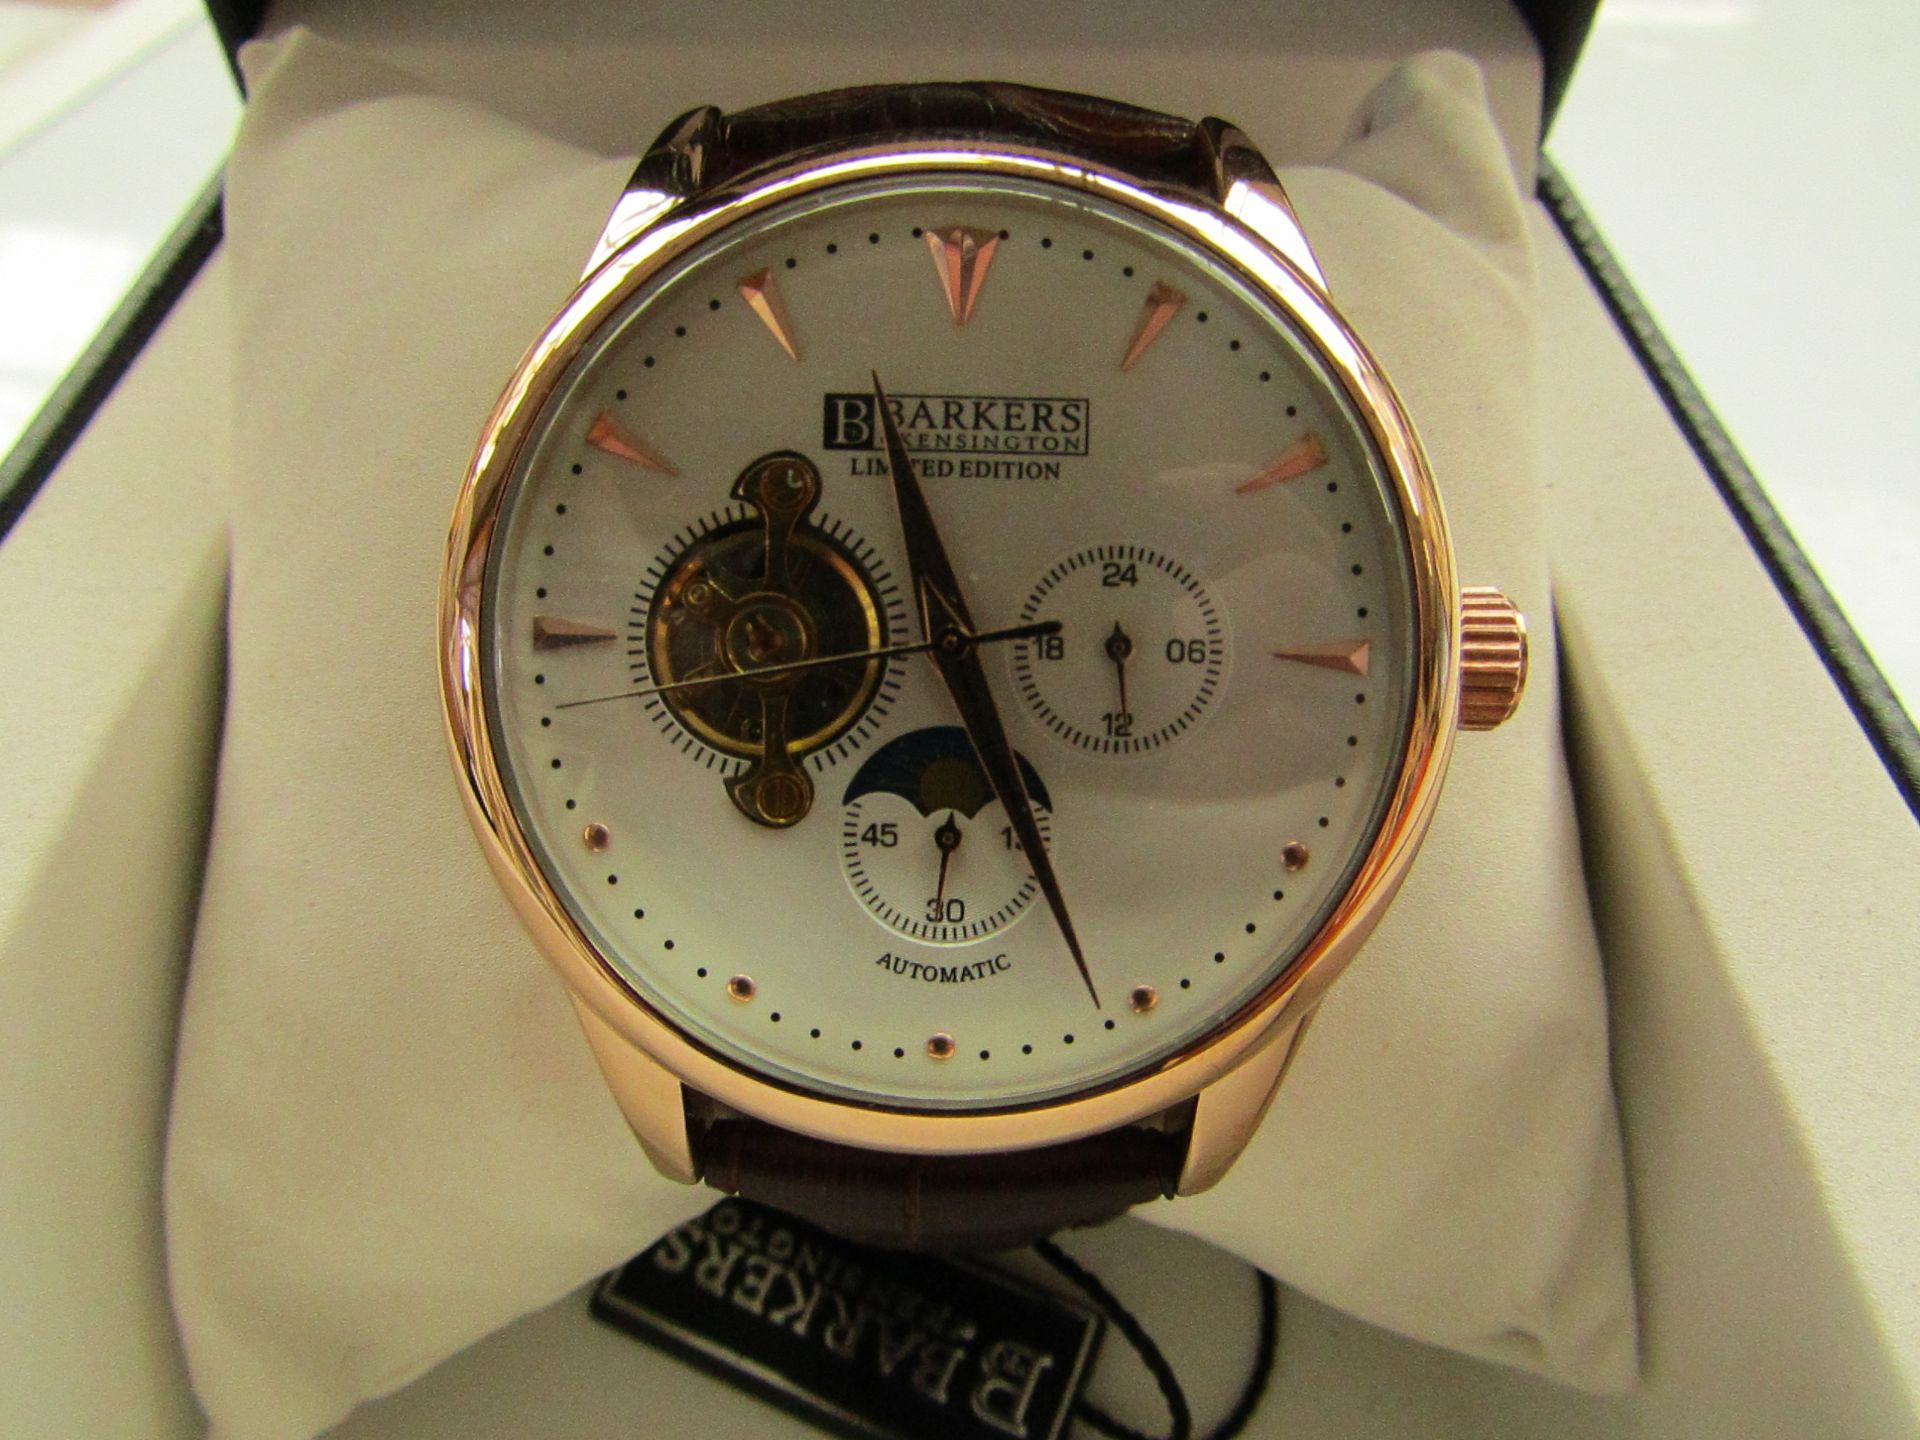 Barkers of Kensington Model: Regatta White SRP GBP315 Condition: Brand new with box, tags and 5-yr